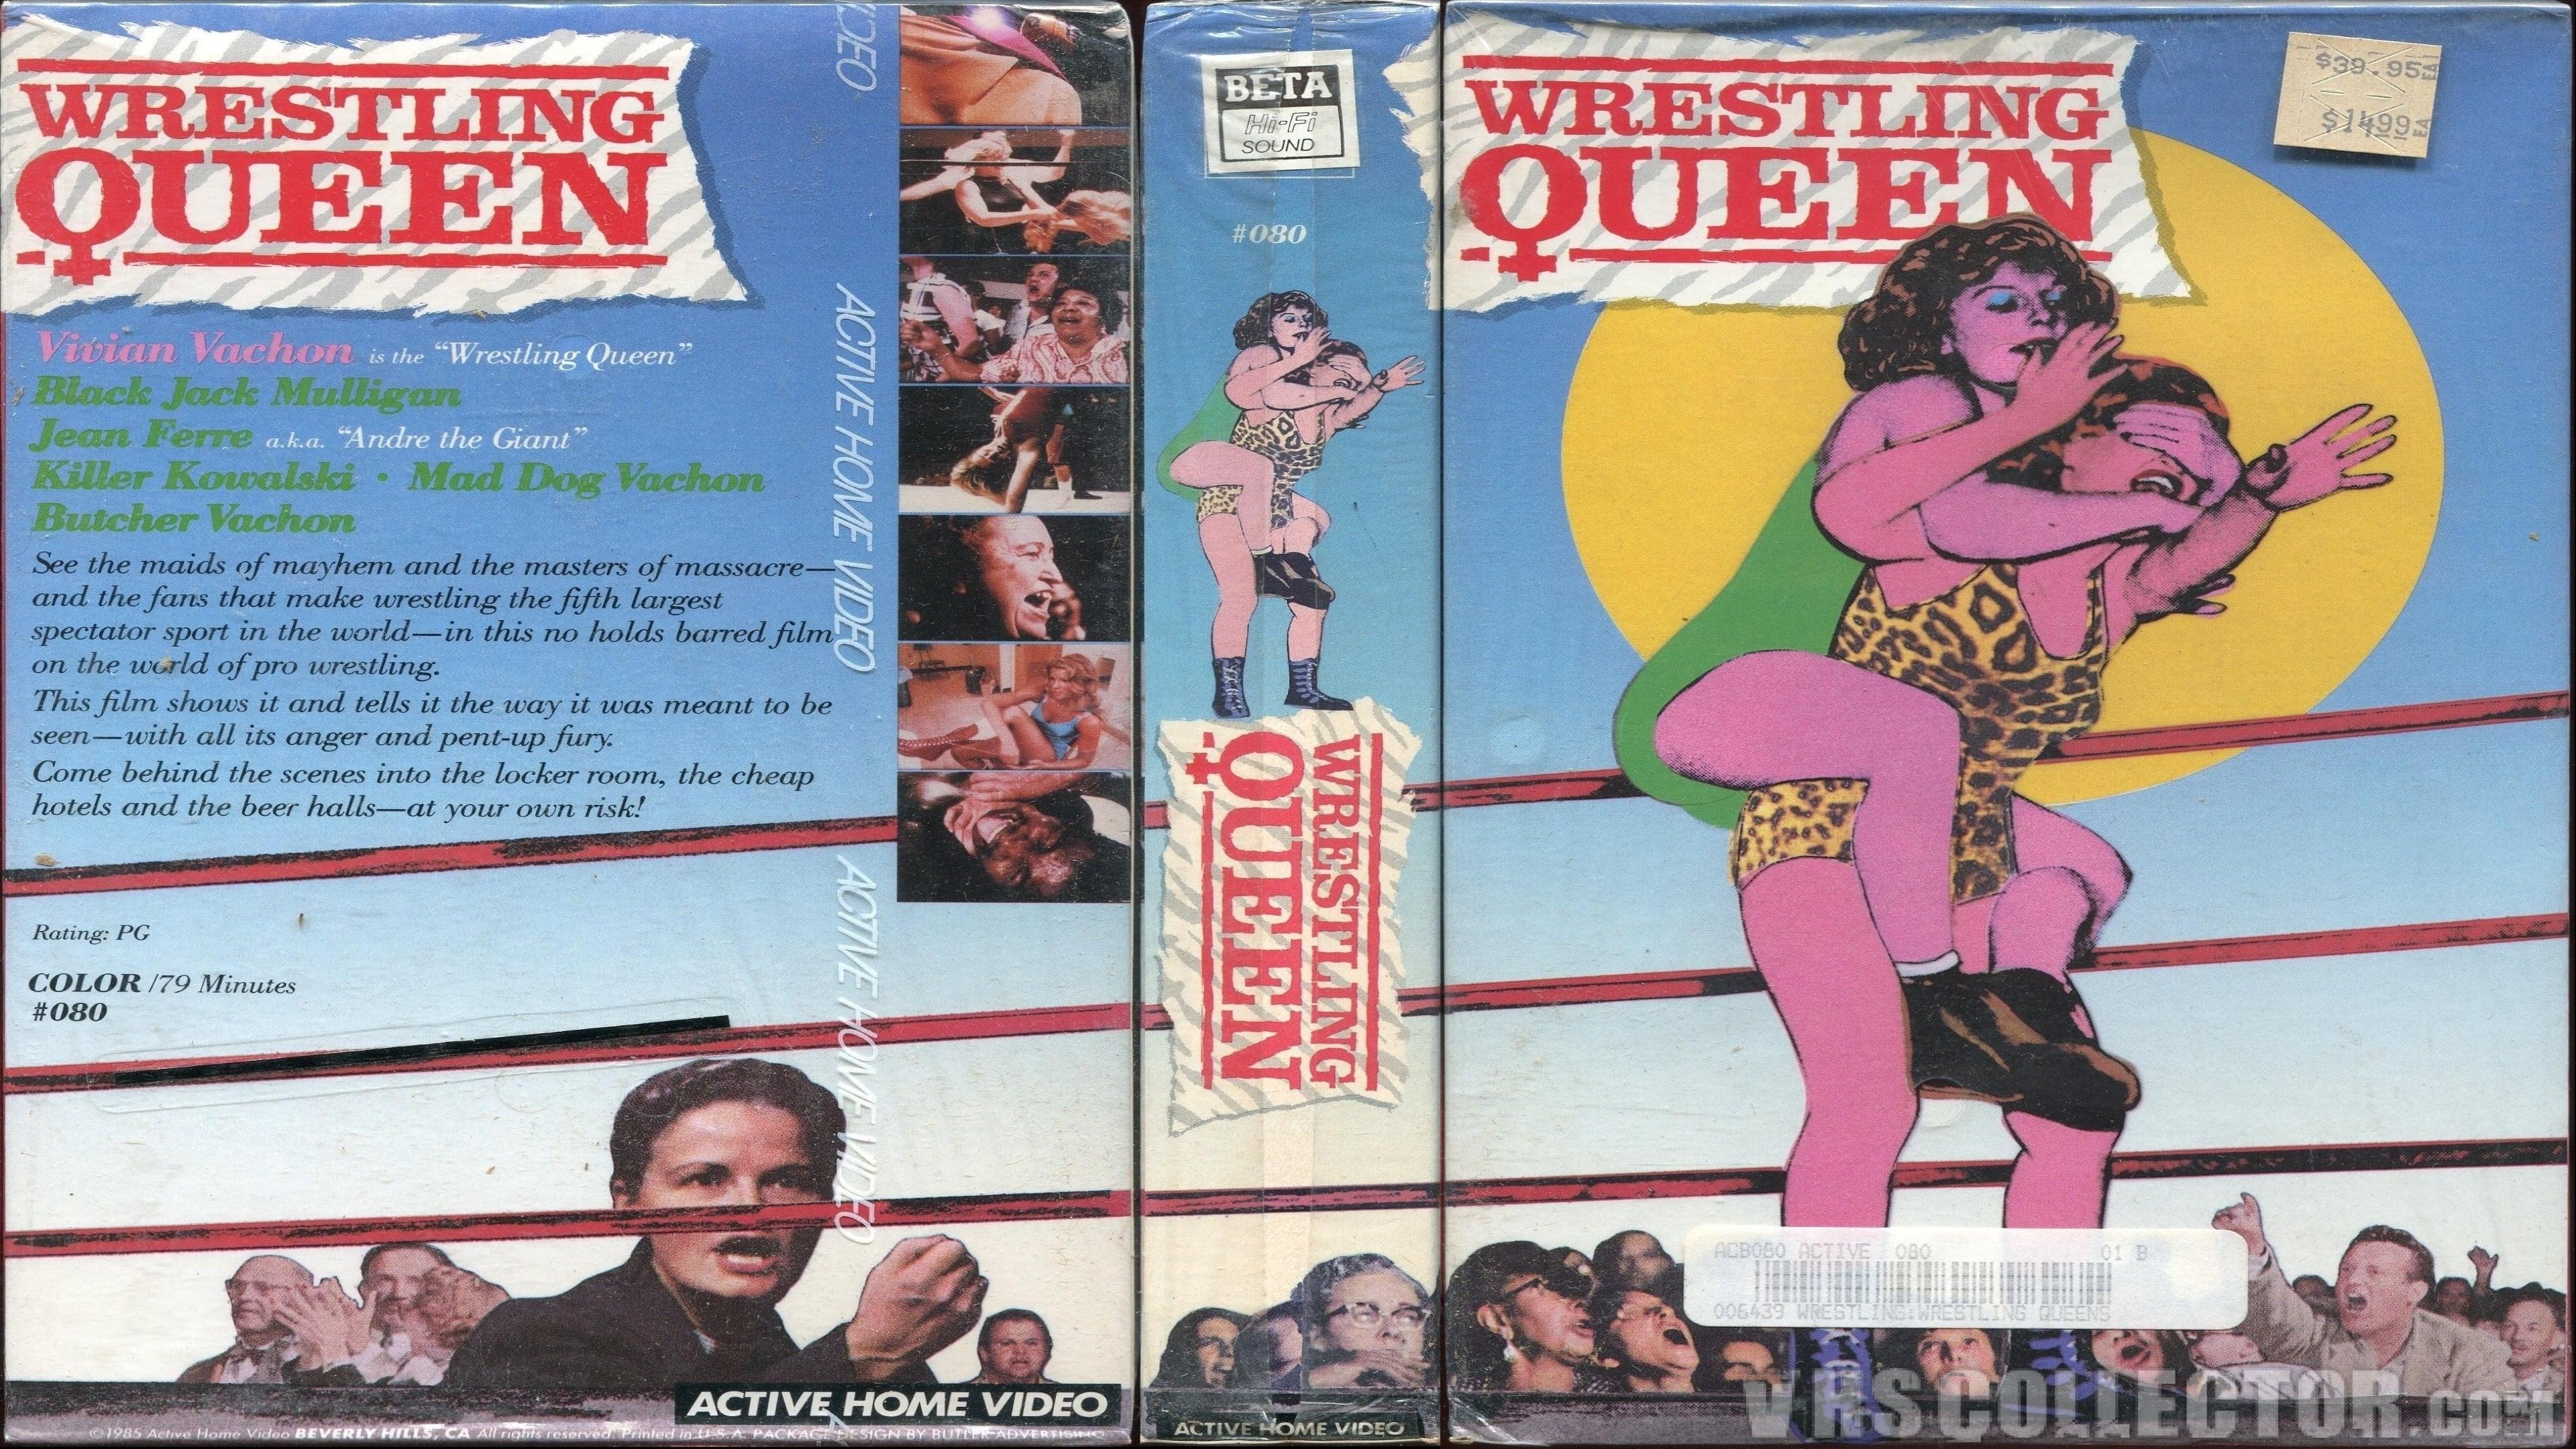 The Wrestling Queen backdrop